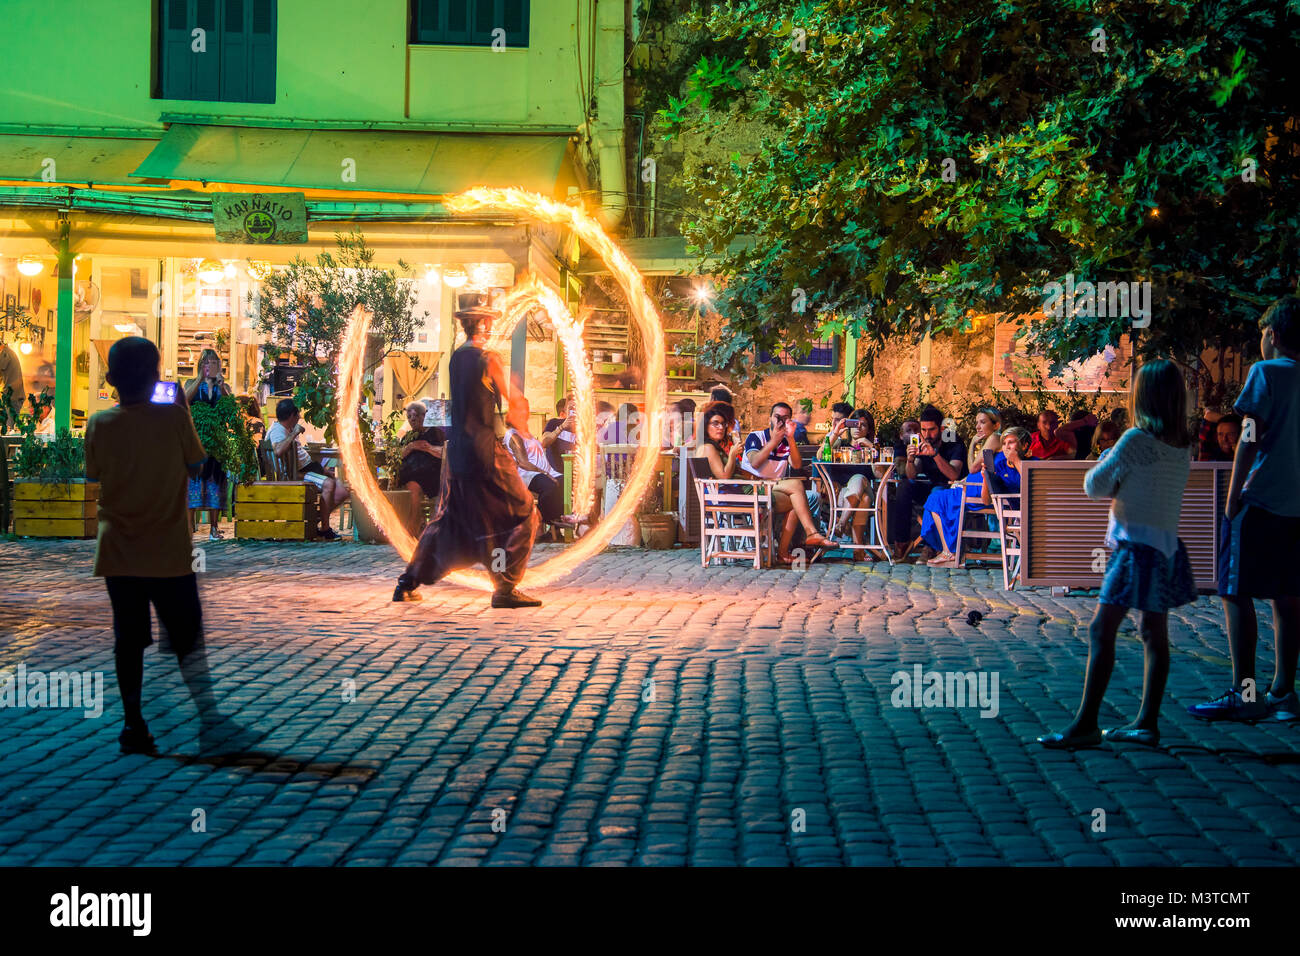 Street entertainer on a fire show in Chania, Crete, Greece Stock Photo